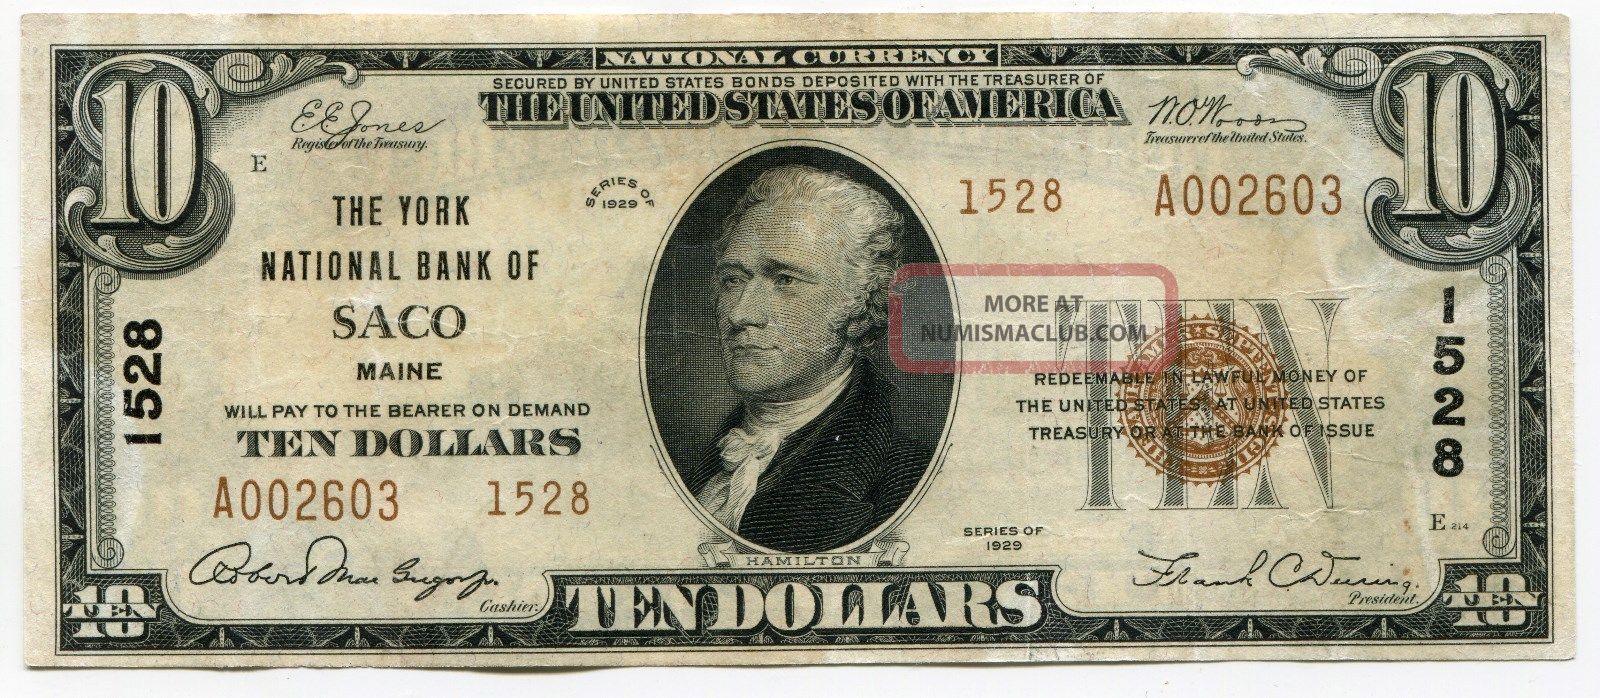 1929 $10 Saco Maine York National Bank Bill Note 1528 Low Serial Number Paper Money: US photo